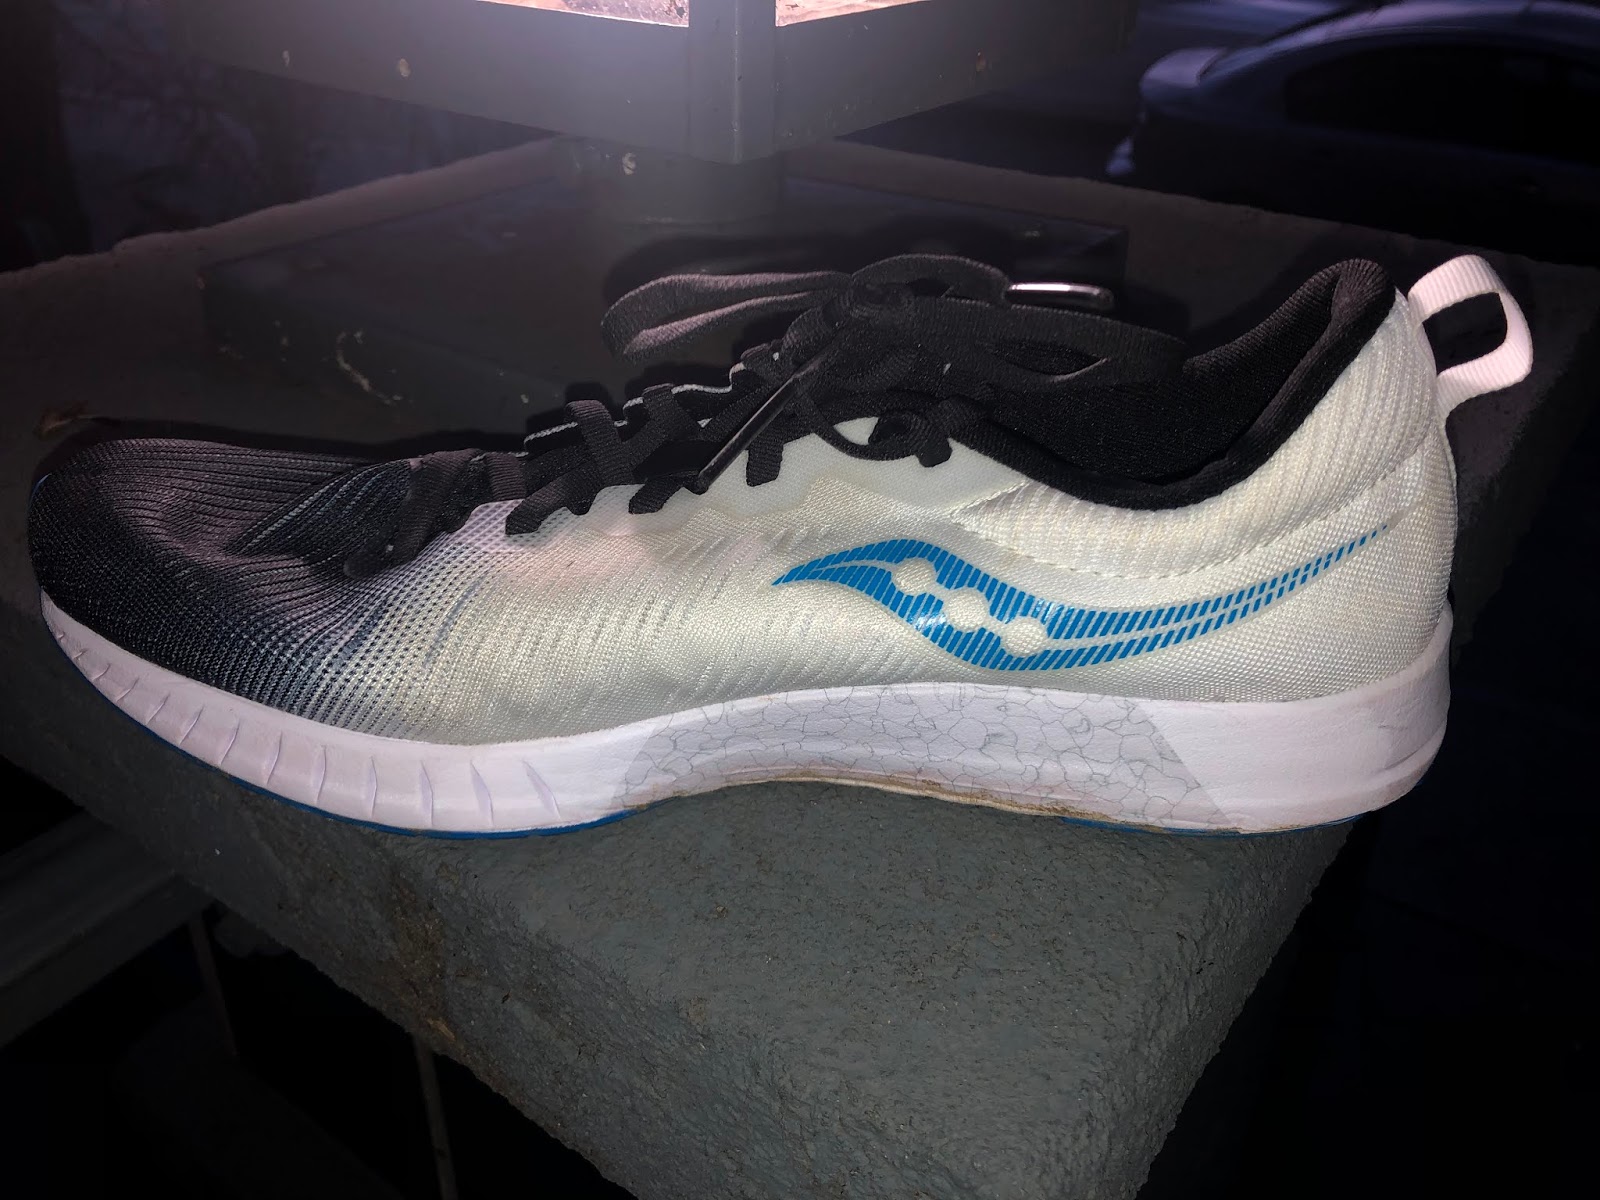 Saucony Fastwitch 9 Review - DOCTORS OF RUNNING